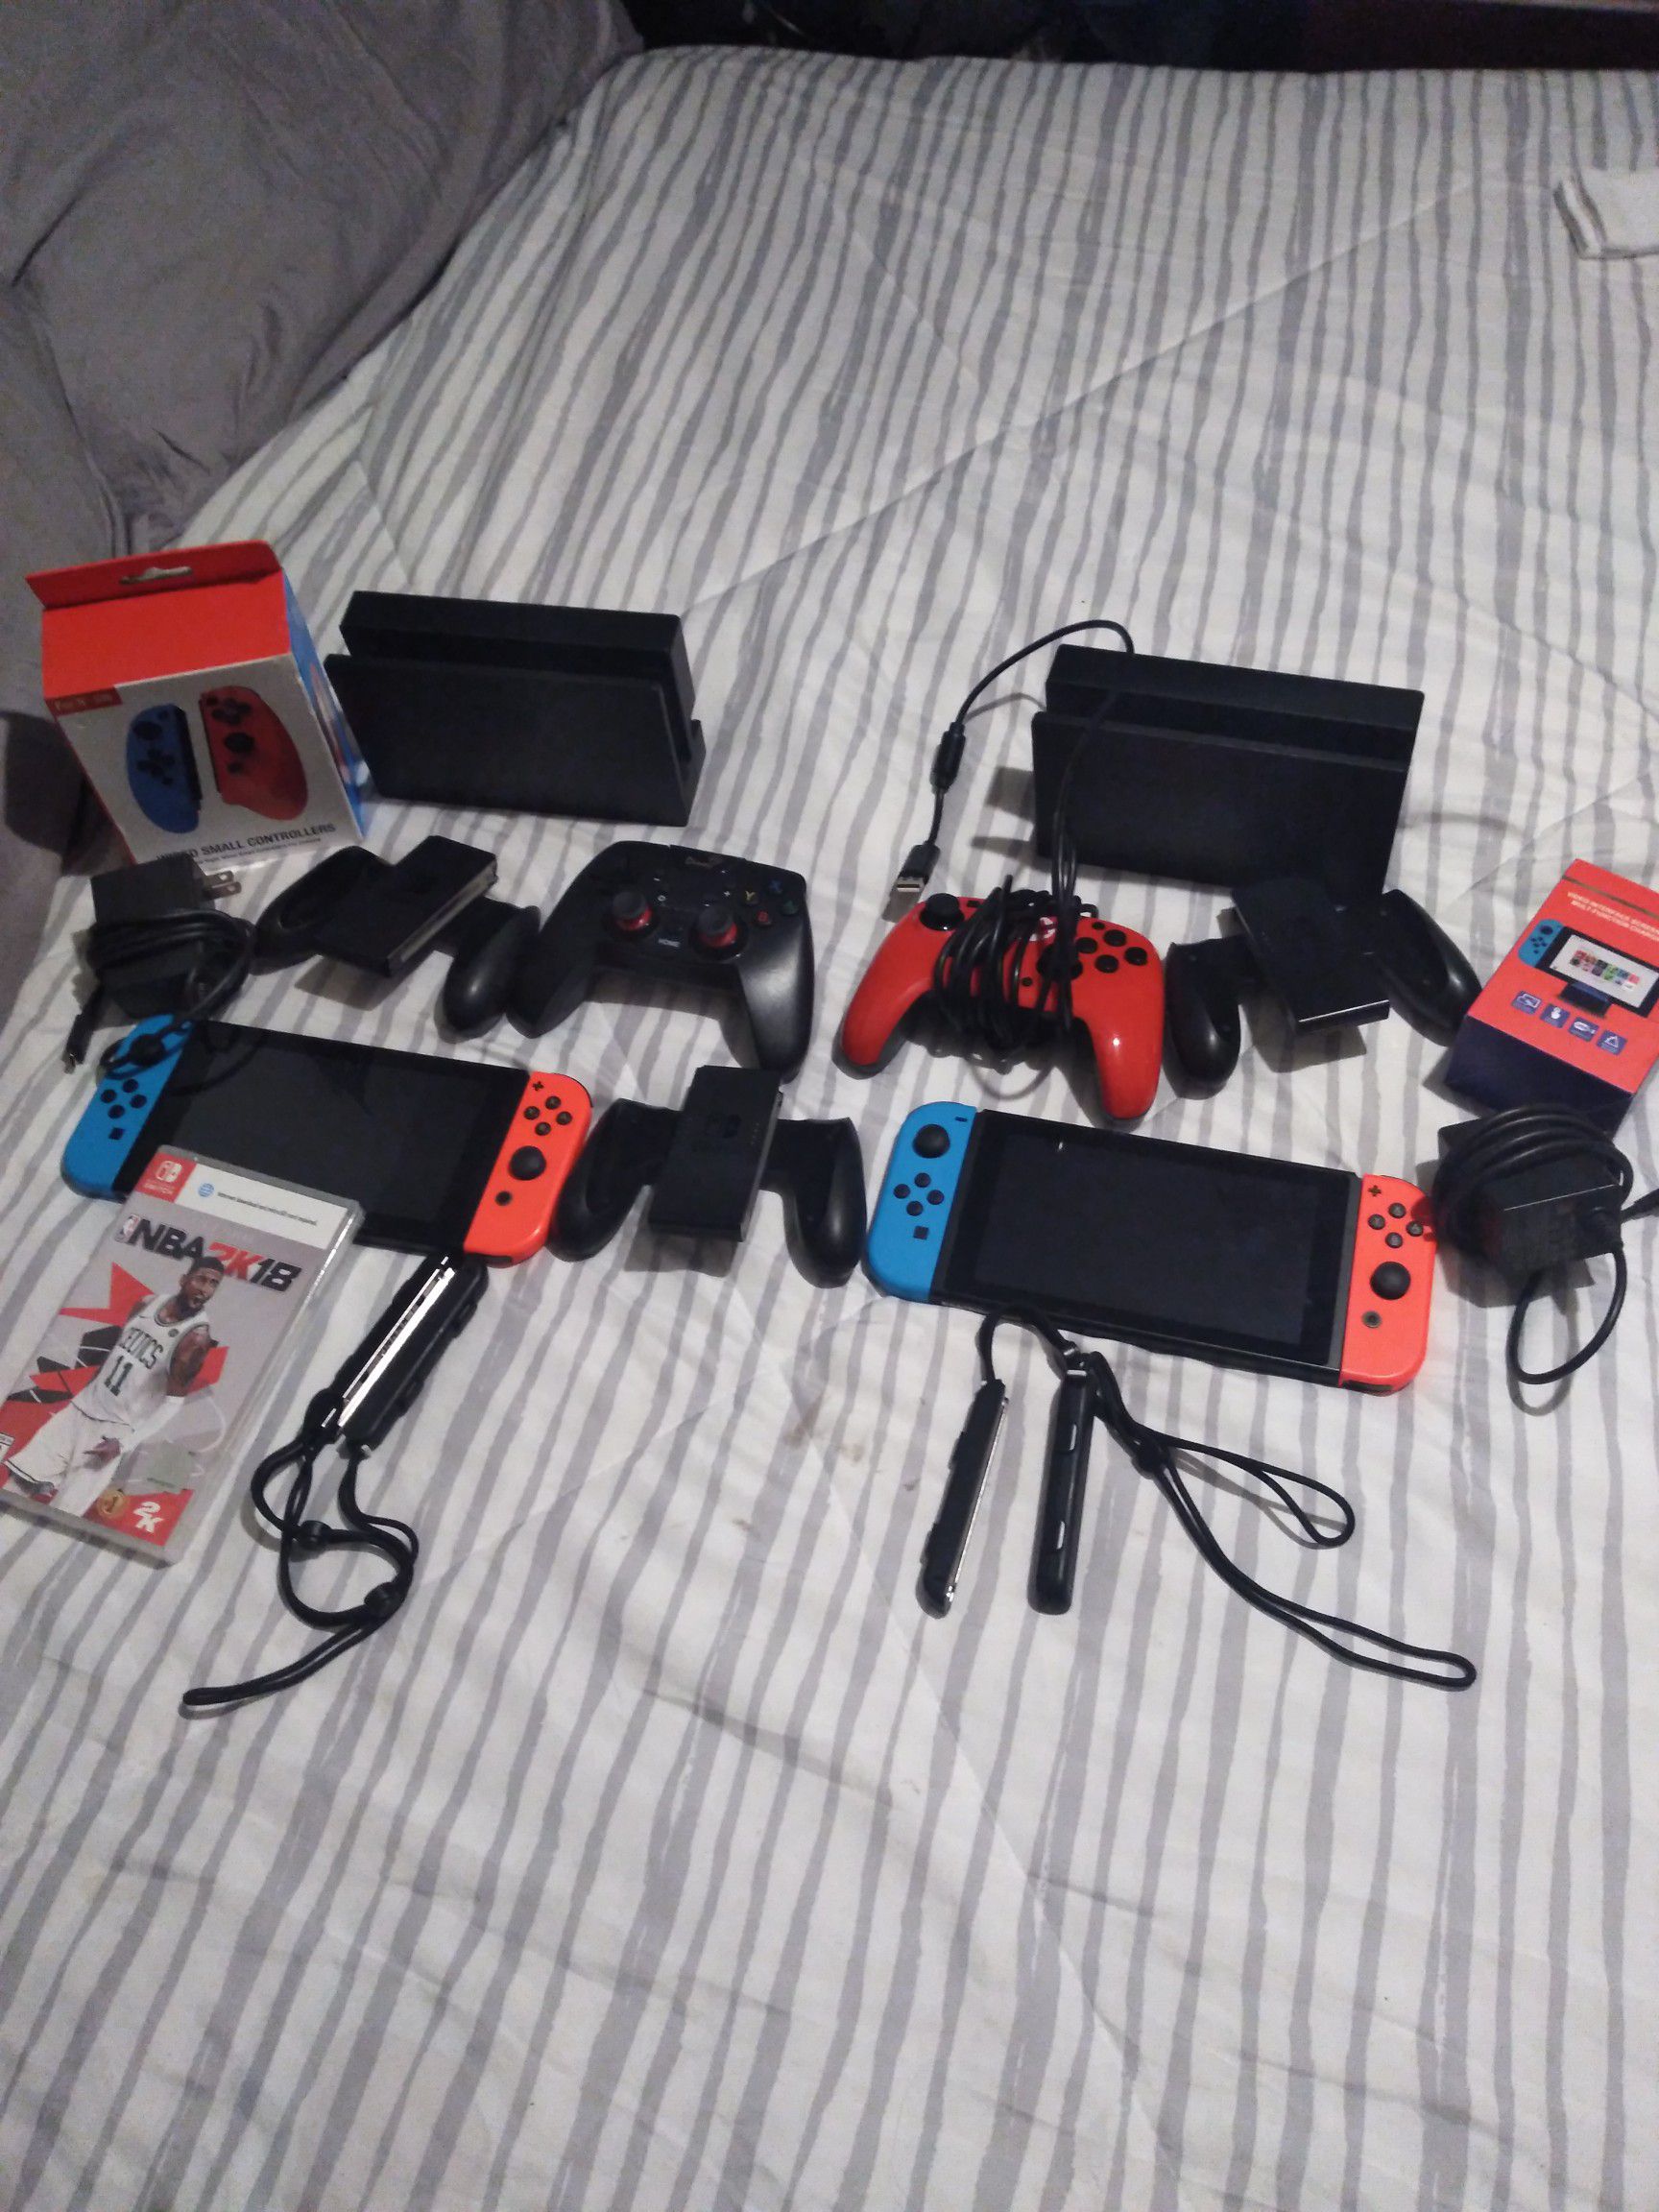 Yes 2 nintendo switches with all the baby that's include in the picture all in perfect condition 2 months old.( Pick up only)